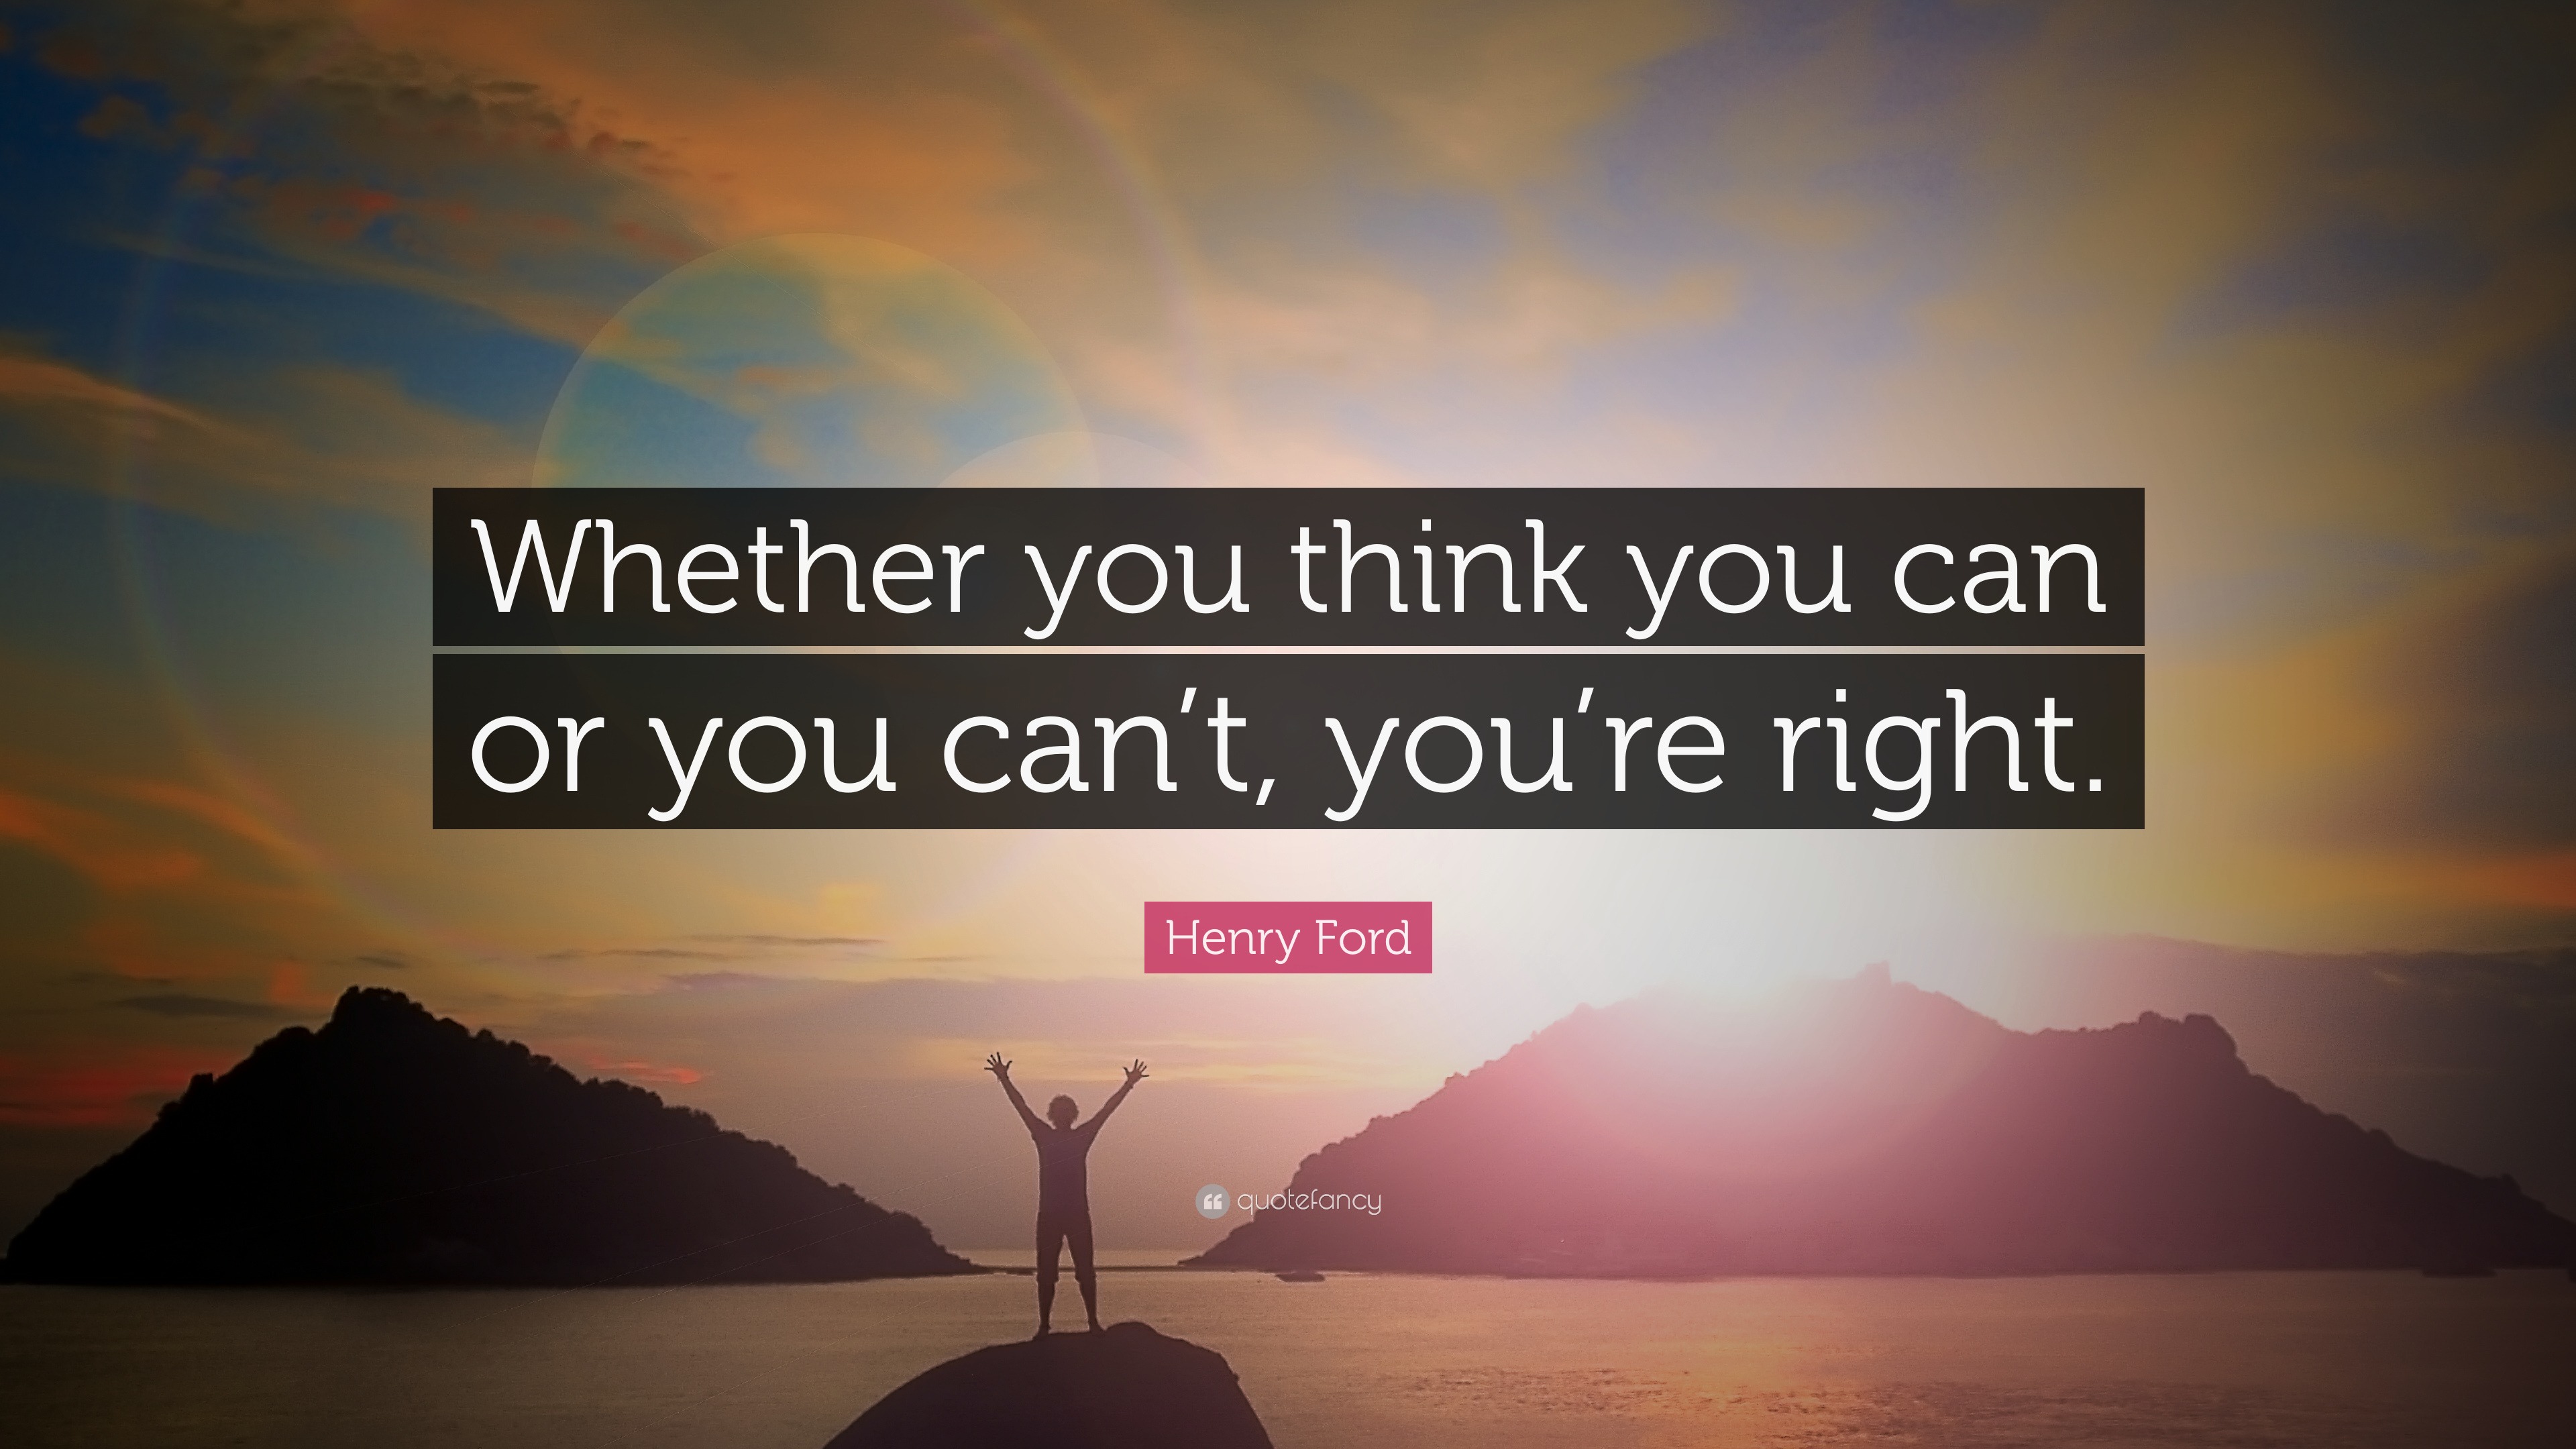 Henry Ford Quote: “Whether you think you can or you can’t, you’re right.”